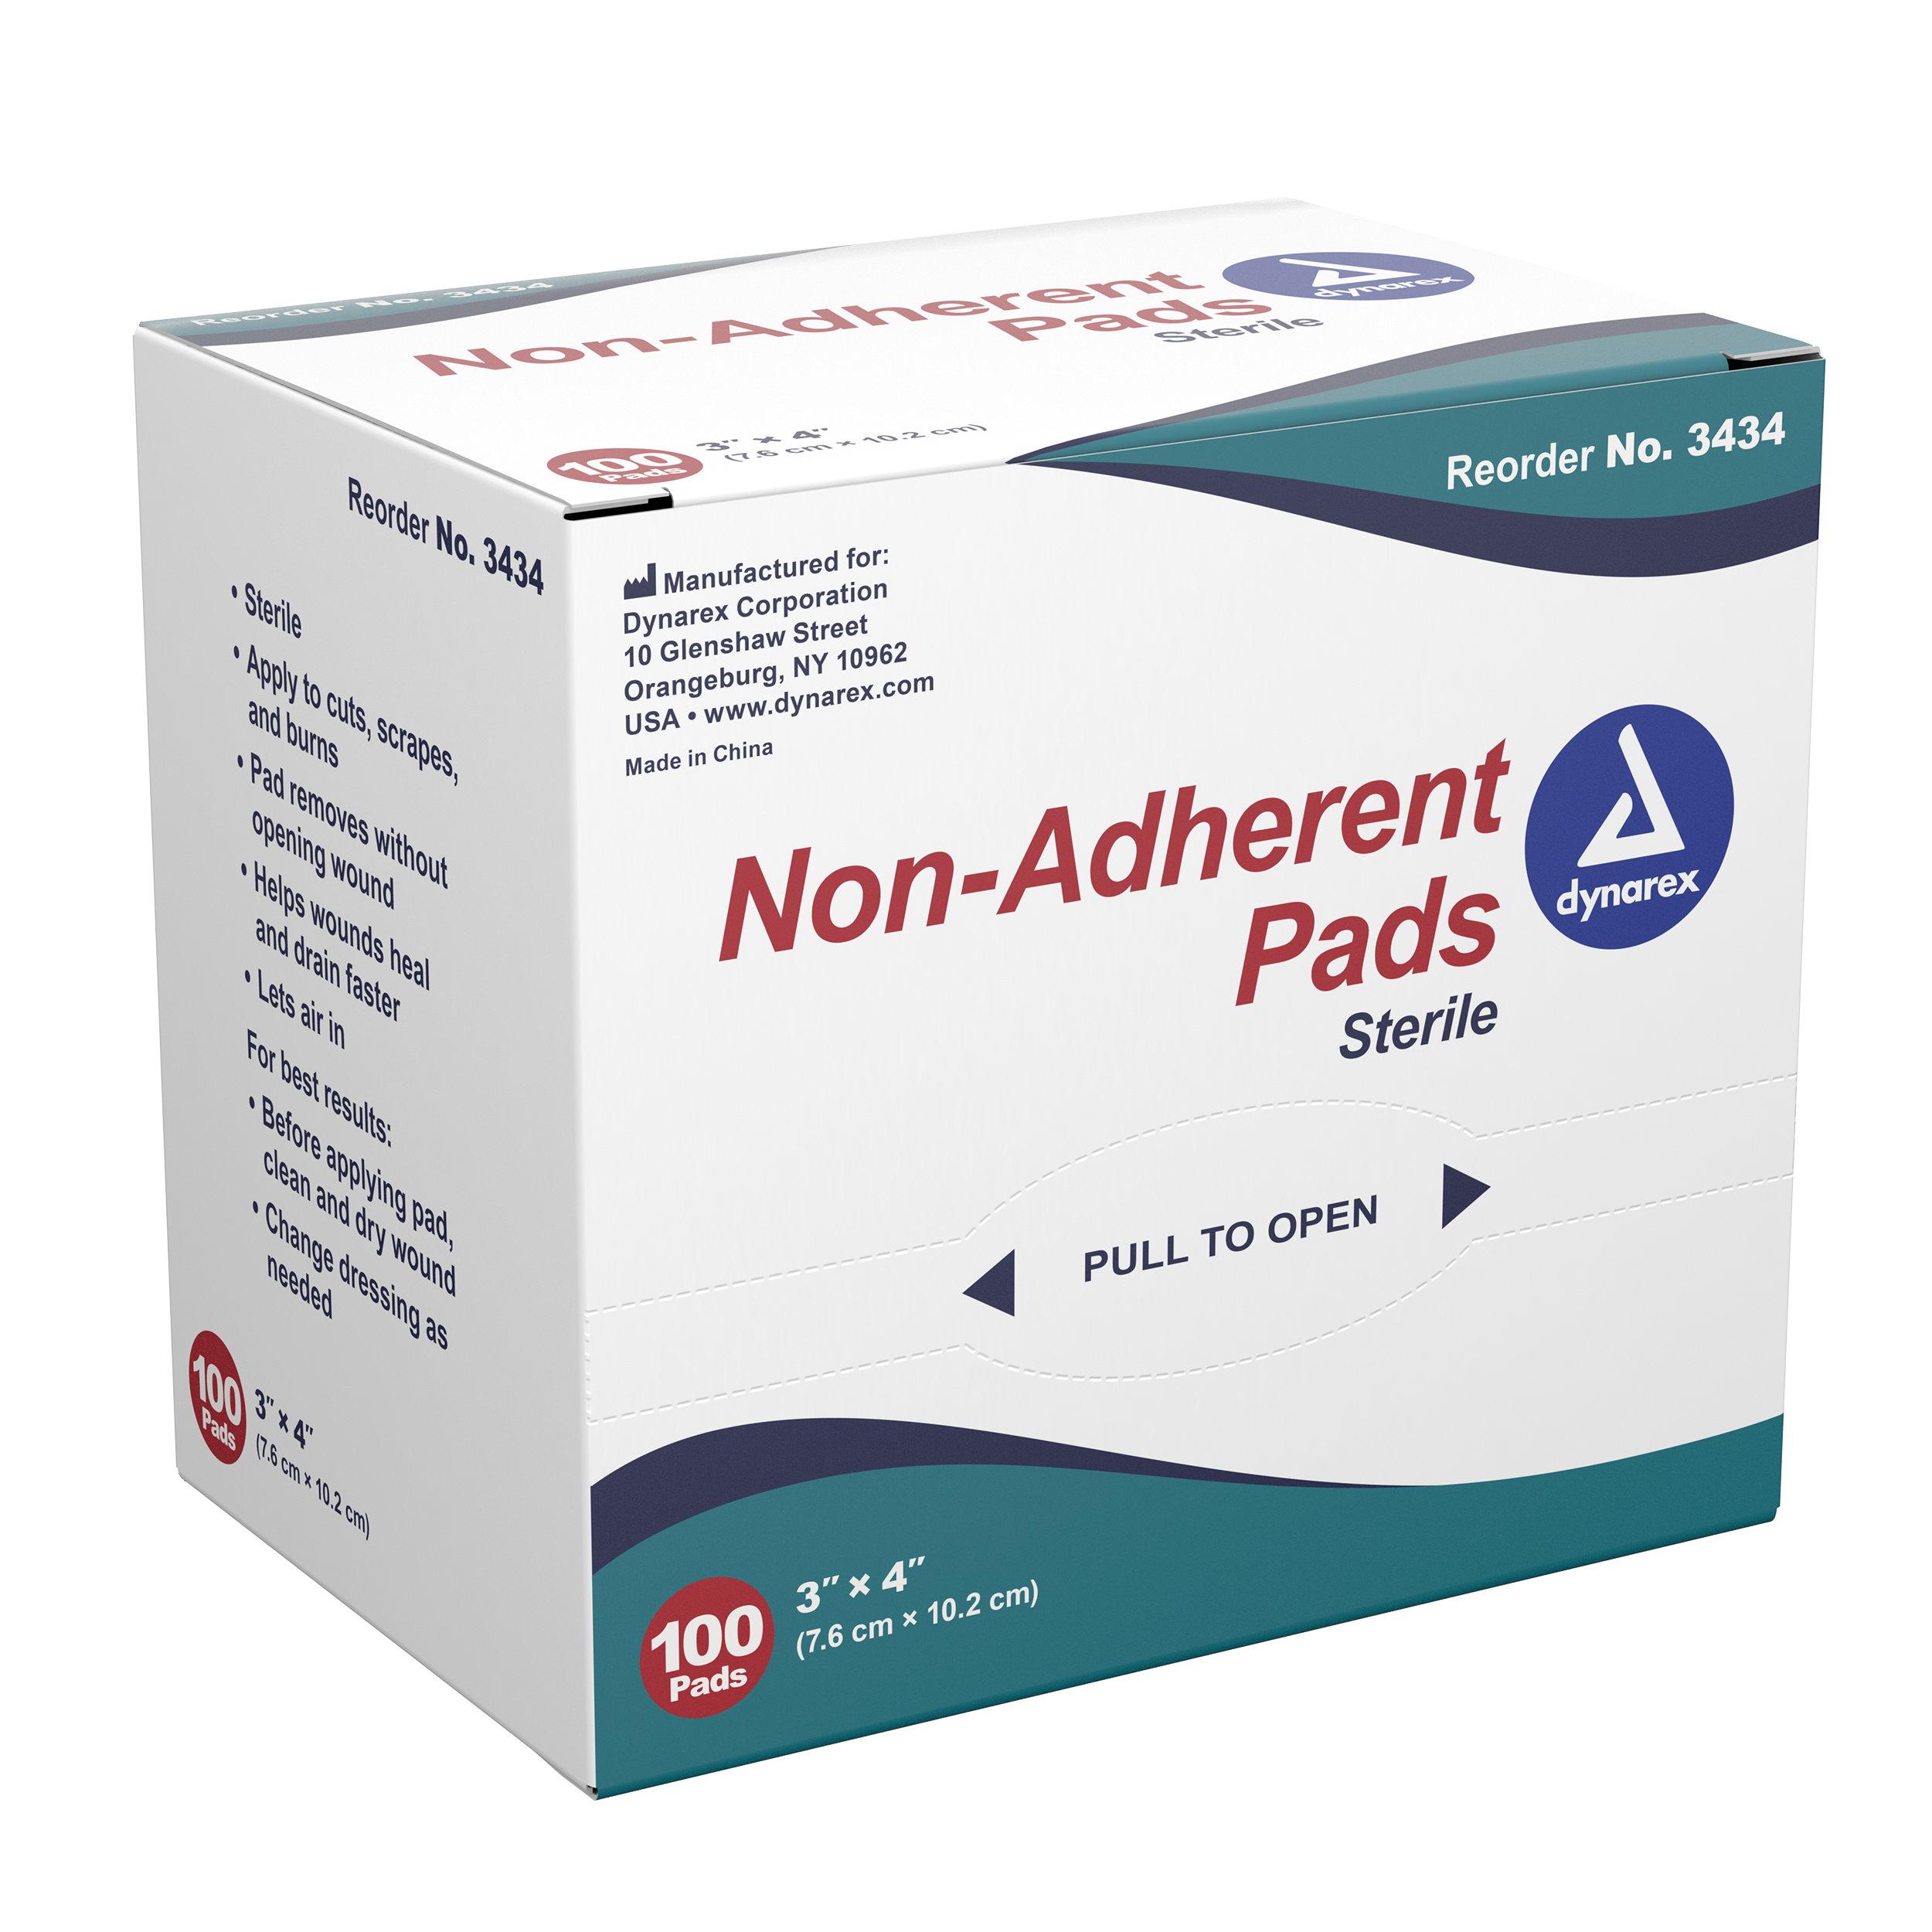 Non-adherent Pads Sterile - 3